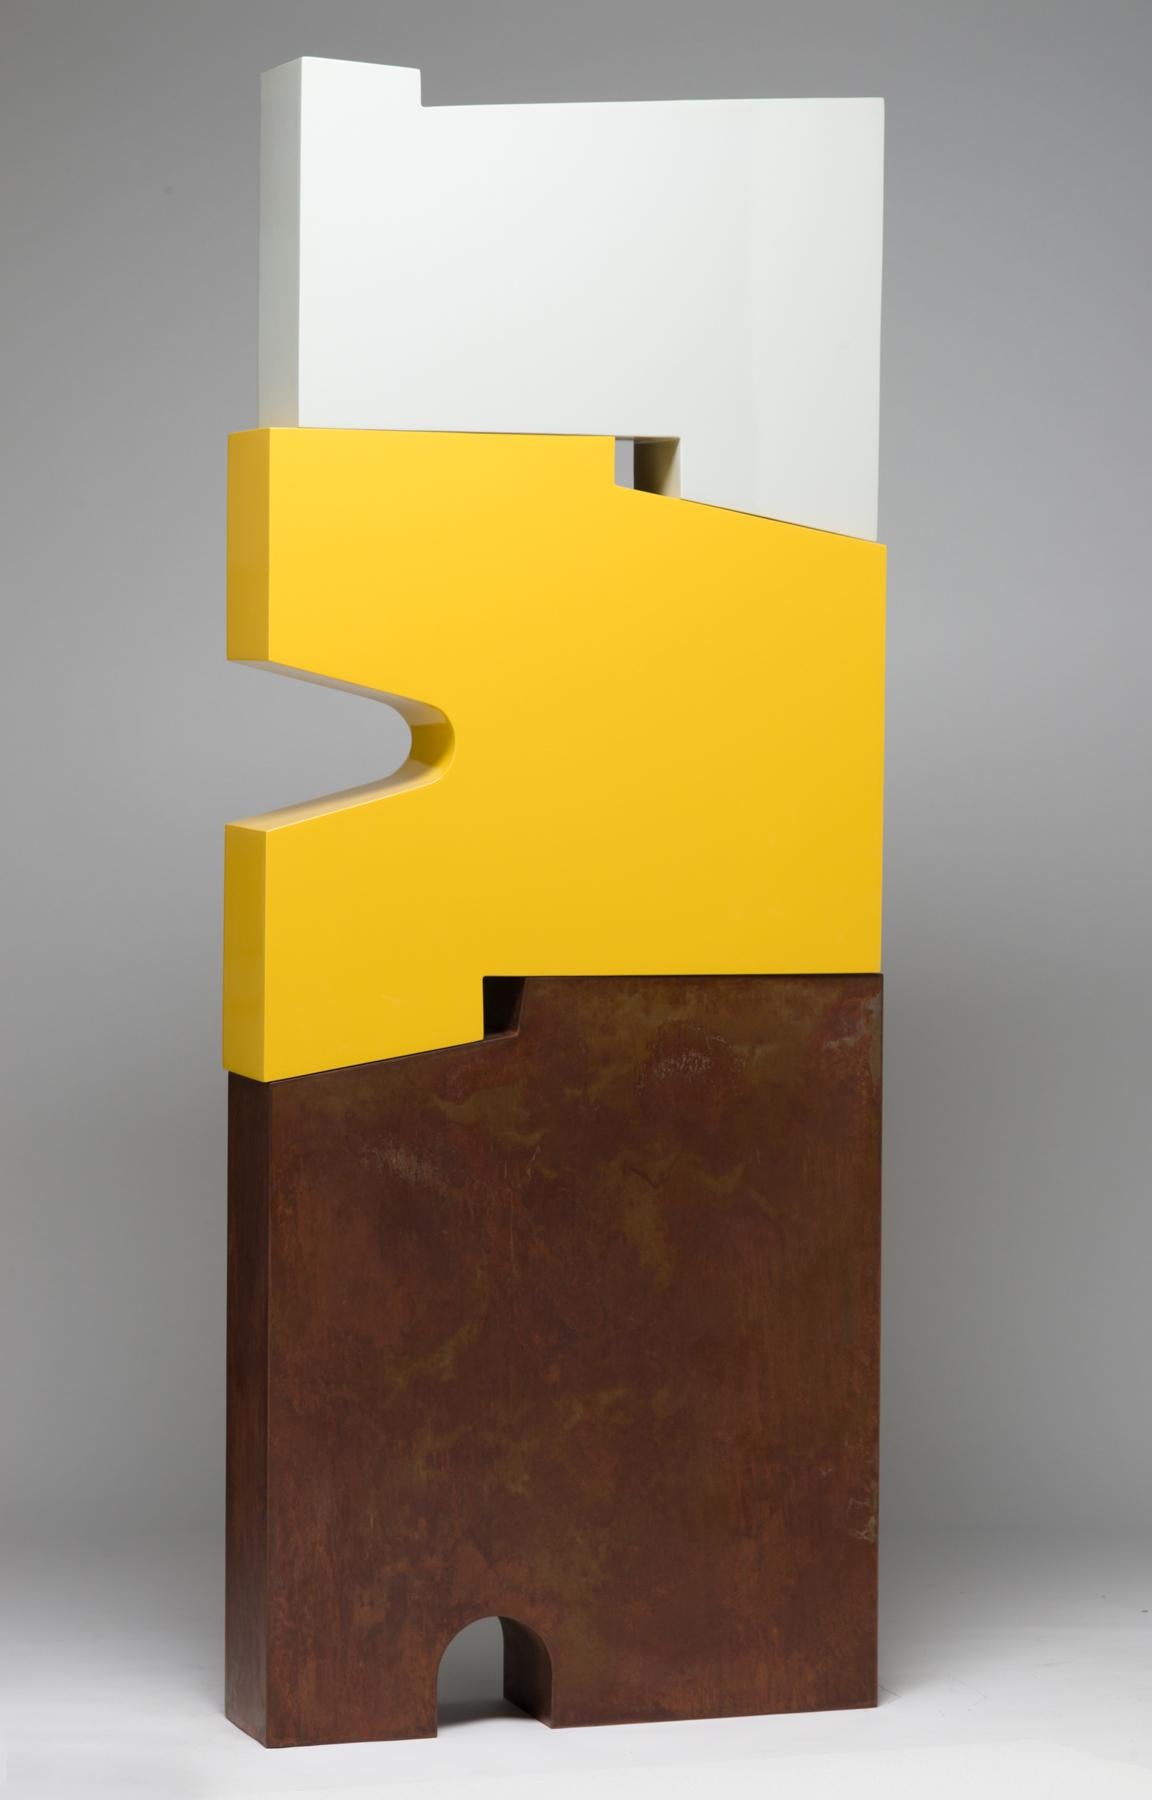 Pascal Pierme Abstract Sculpture - Tall outside sculpture, geometric abstract steel sculpture, steel yellow white